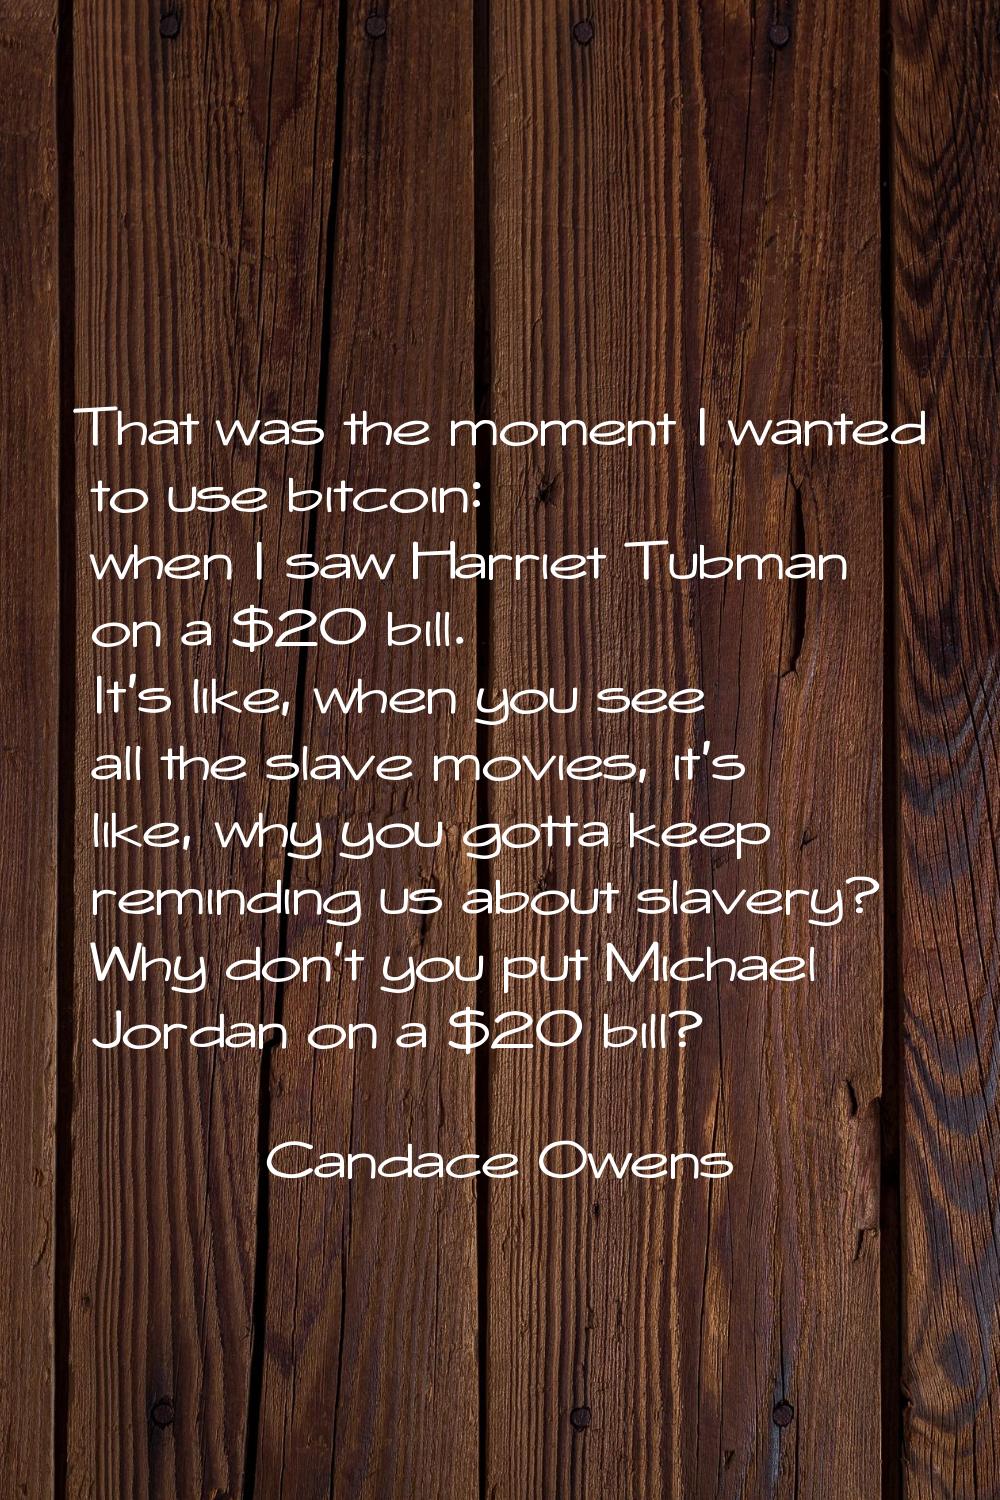 That was the moment I wanted to use bitcoin: when I saw Harriet Tubman on a $20 bill. It's like, wh